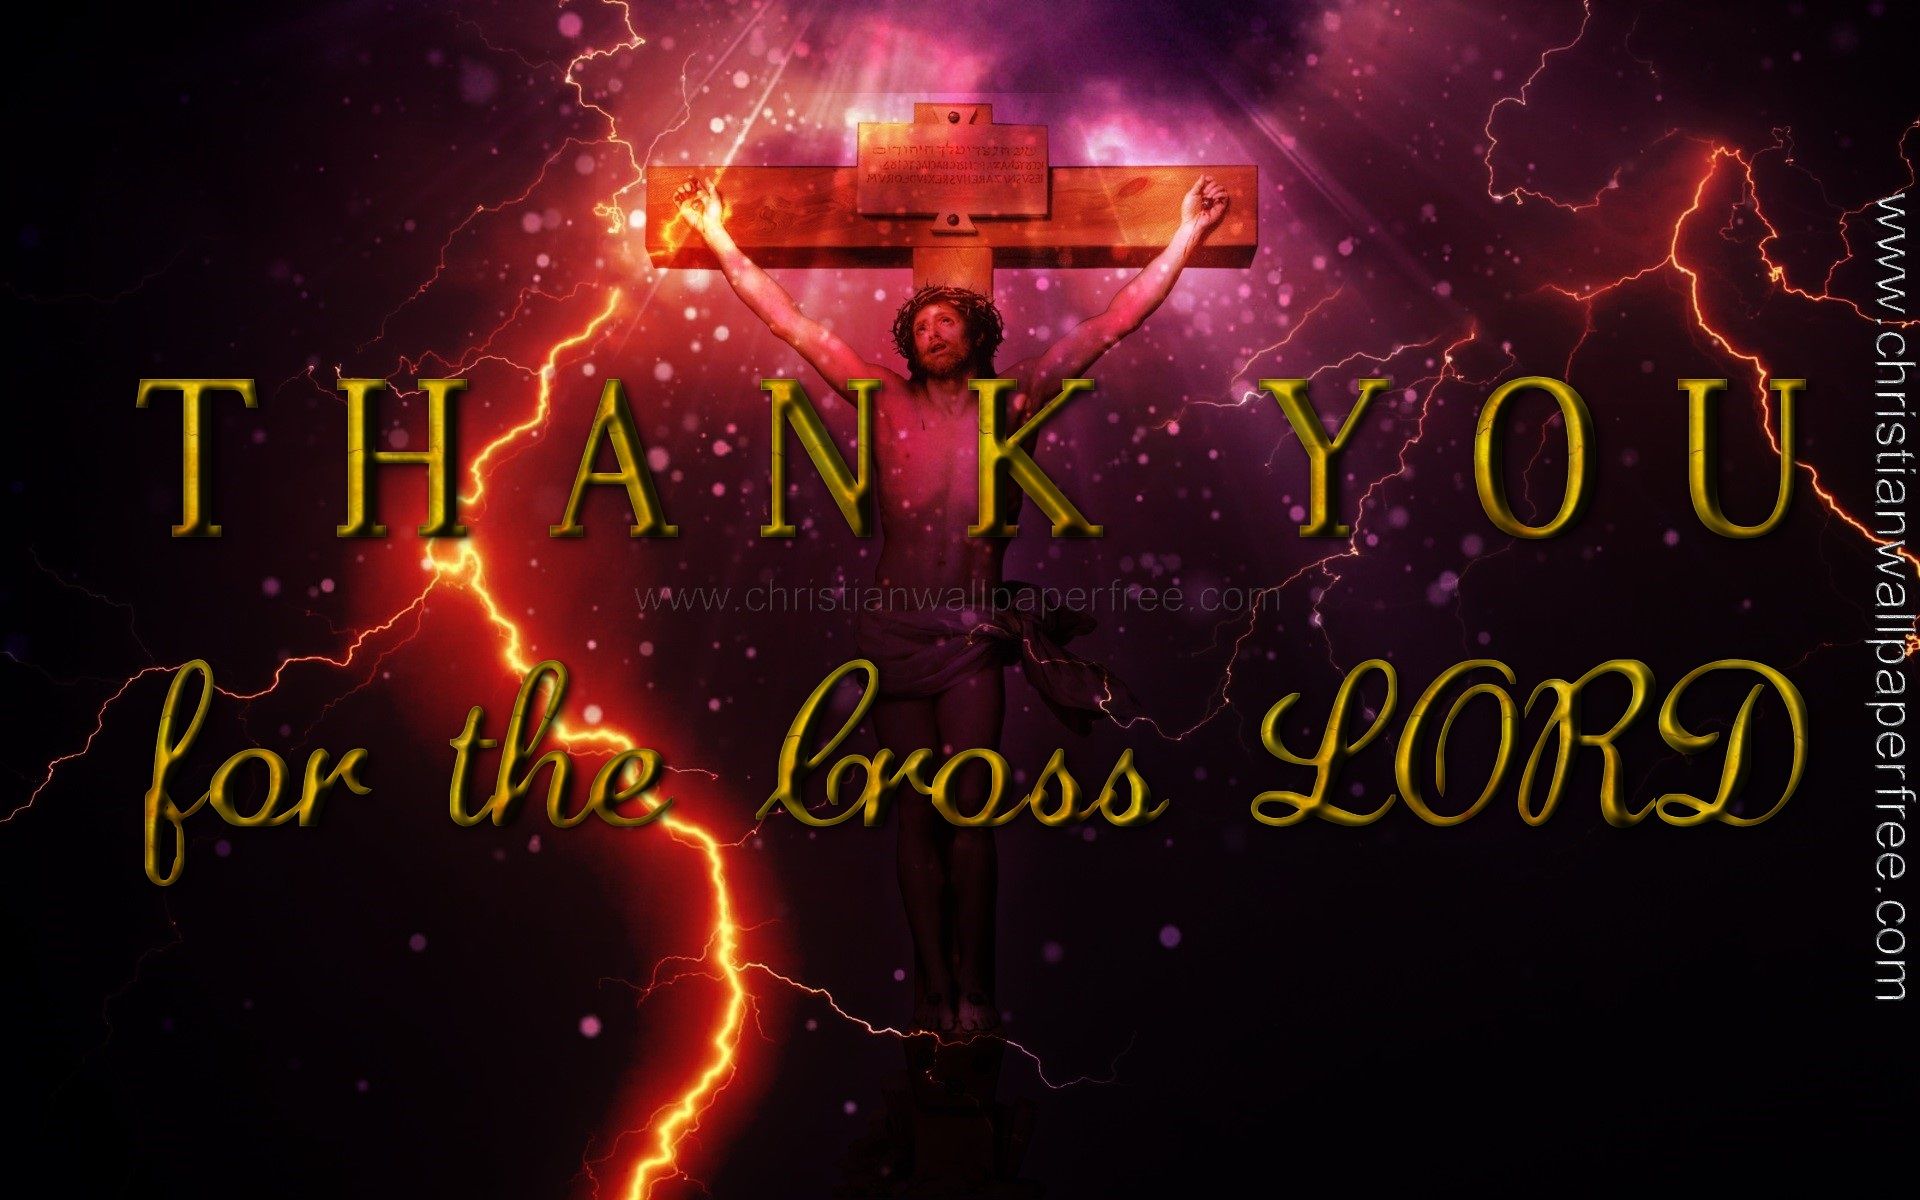 Thank you for the cross lord